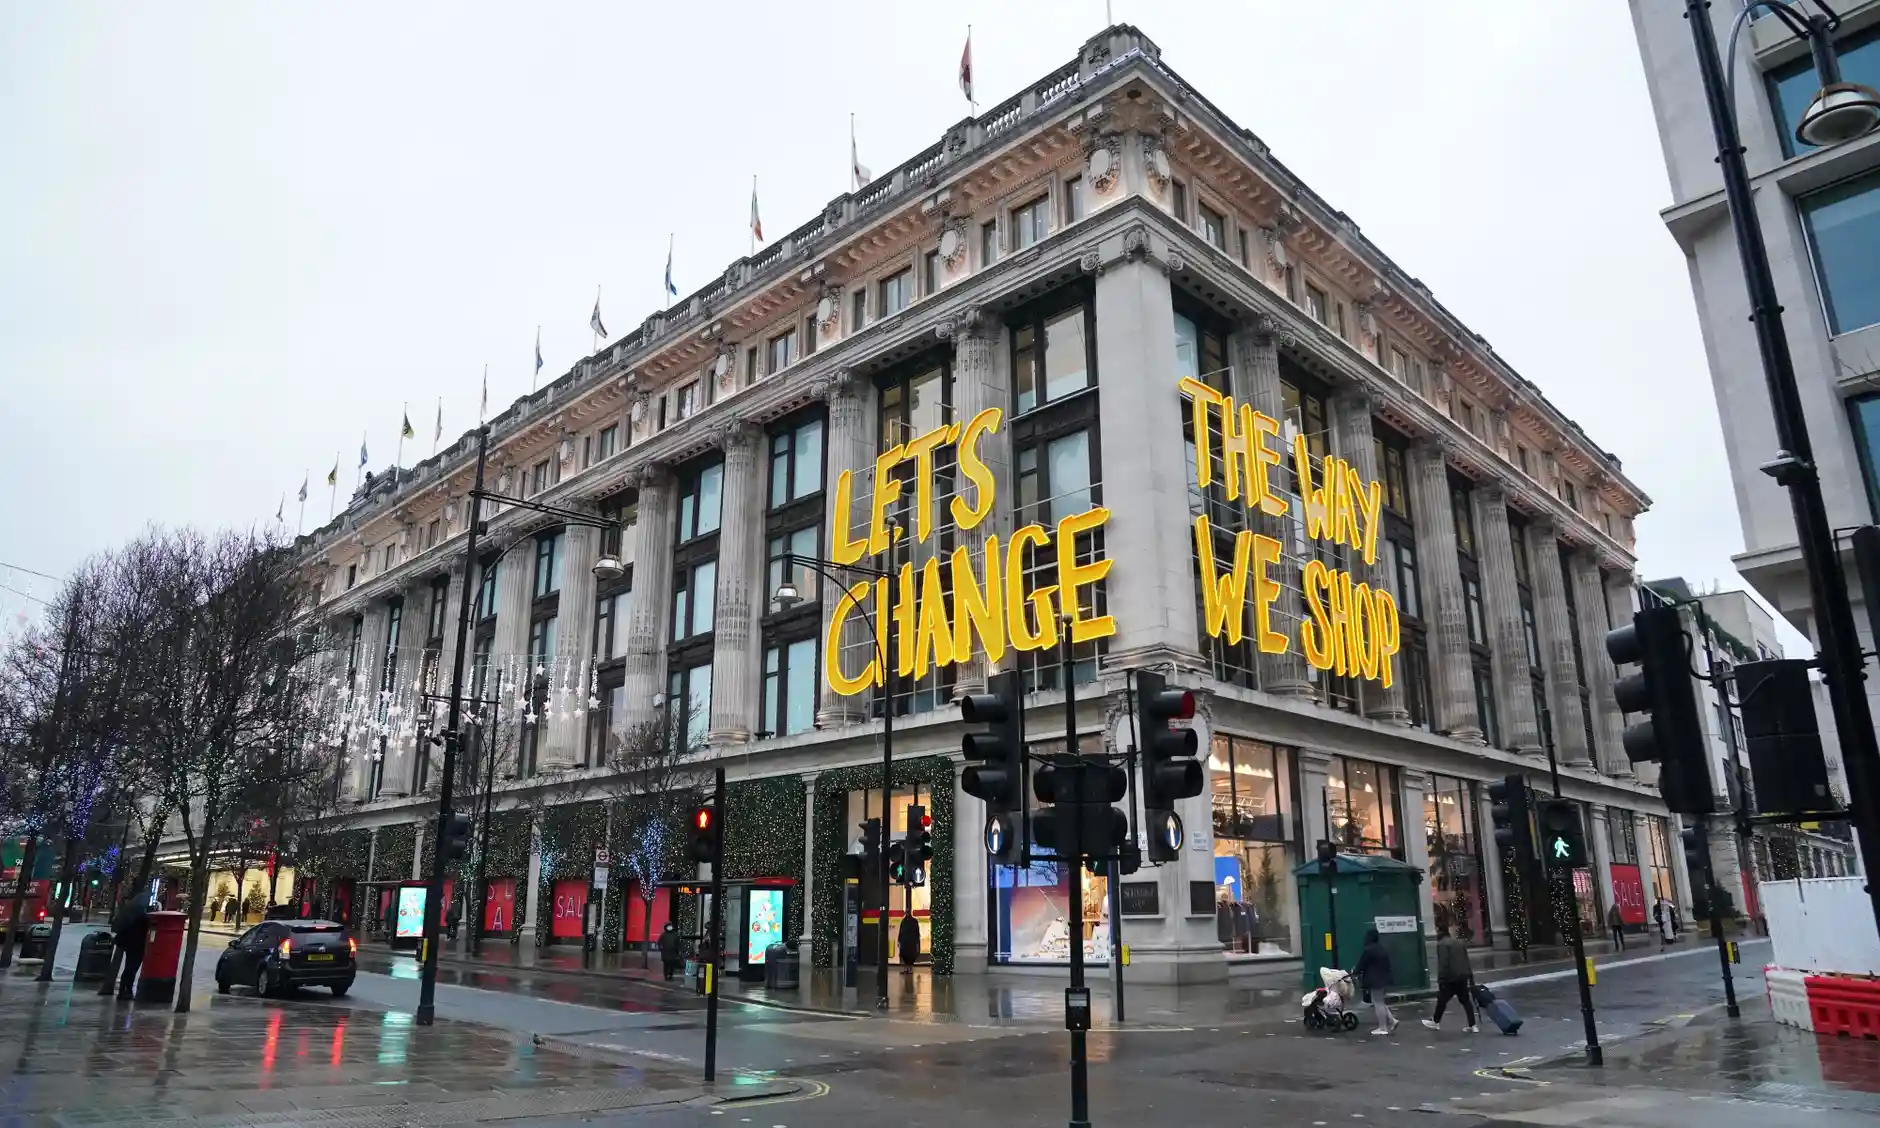 Selfridges aims for half of transactions to be resale, repair, rental or refills by 2030